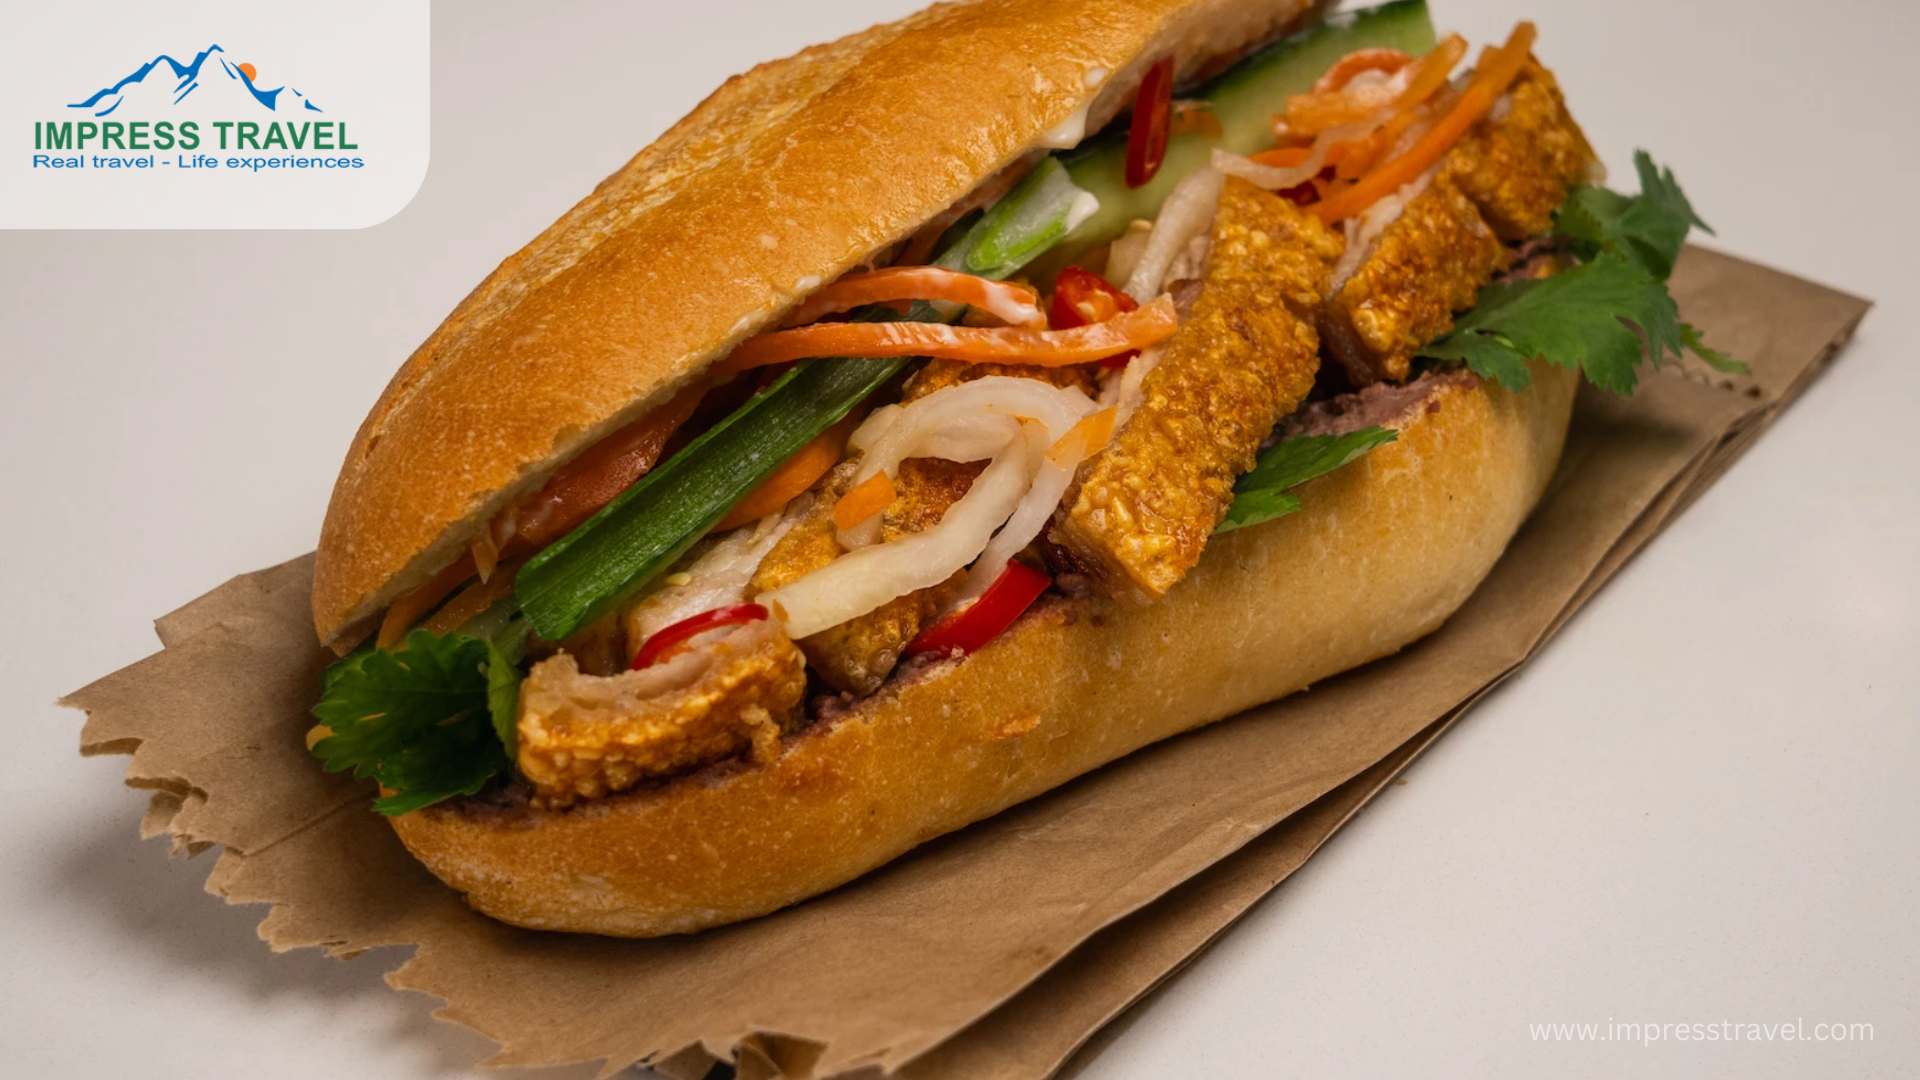 Banh Mi: A traditional food to eat in Hanoi